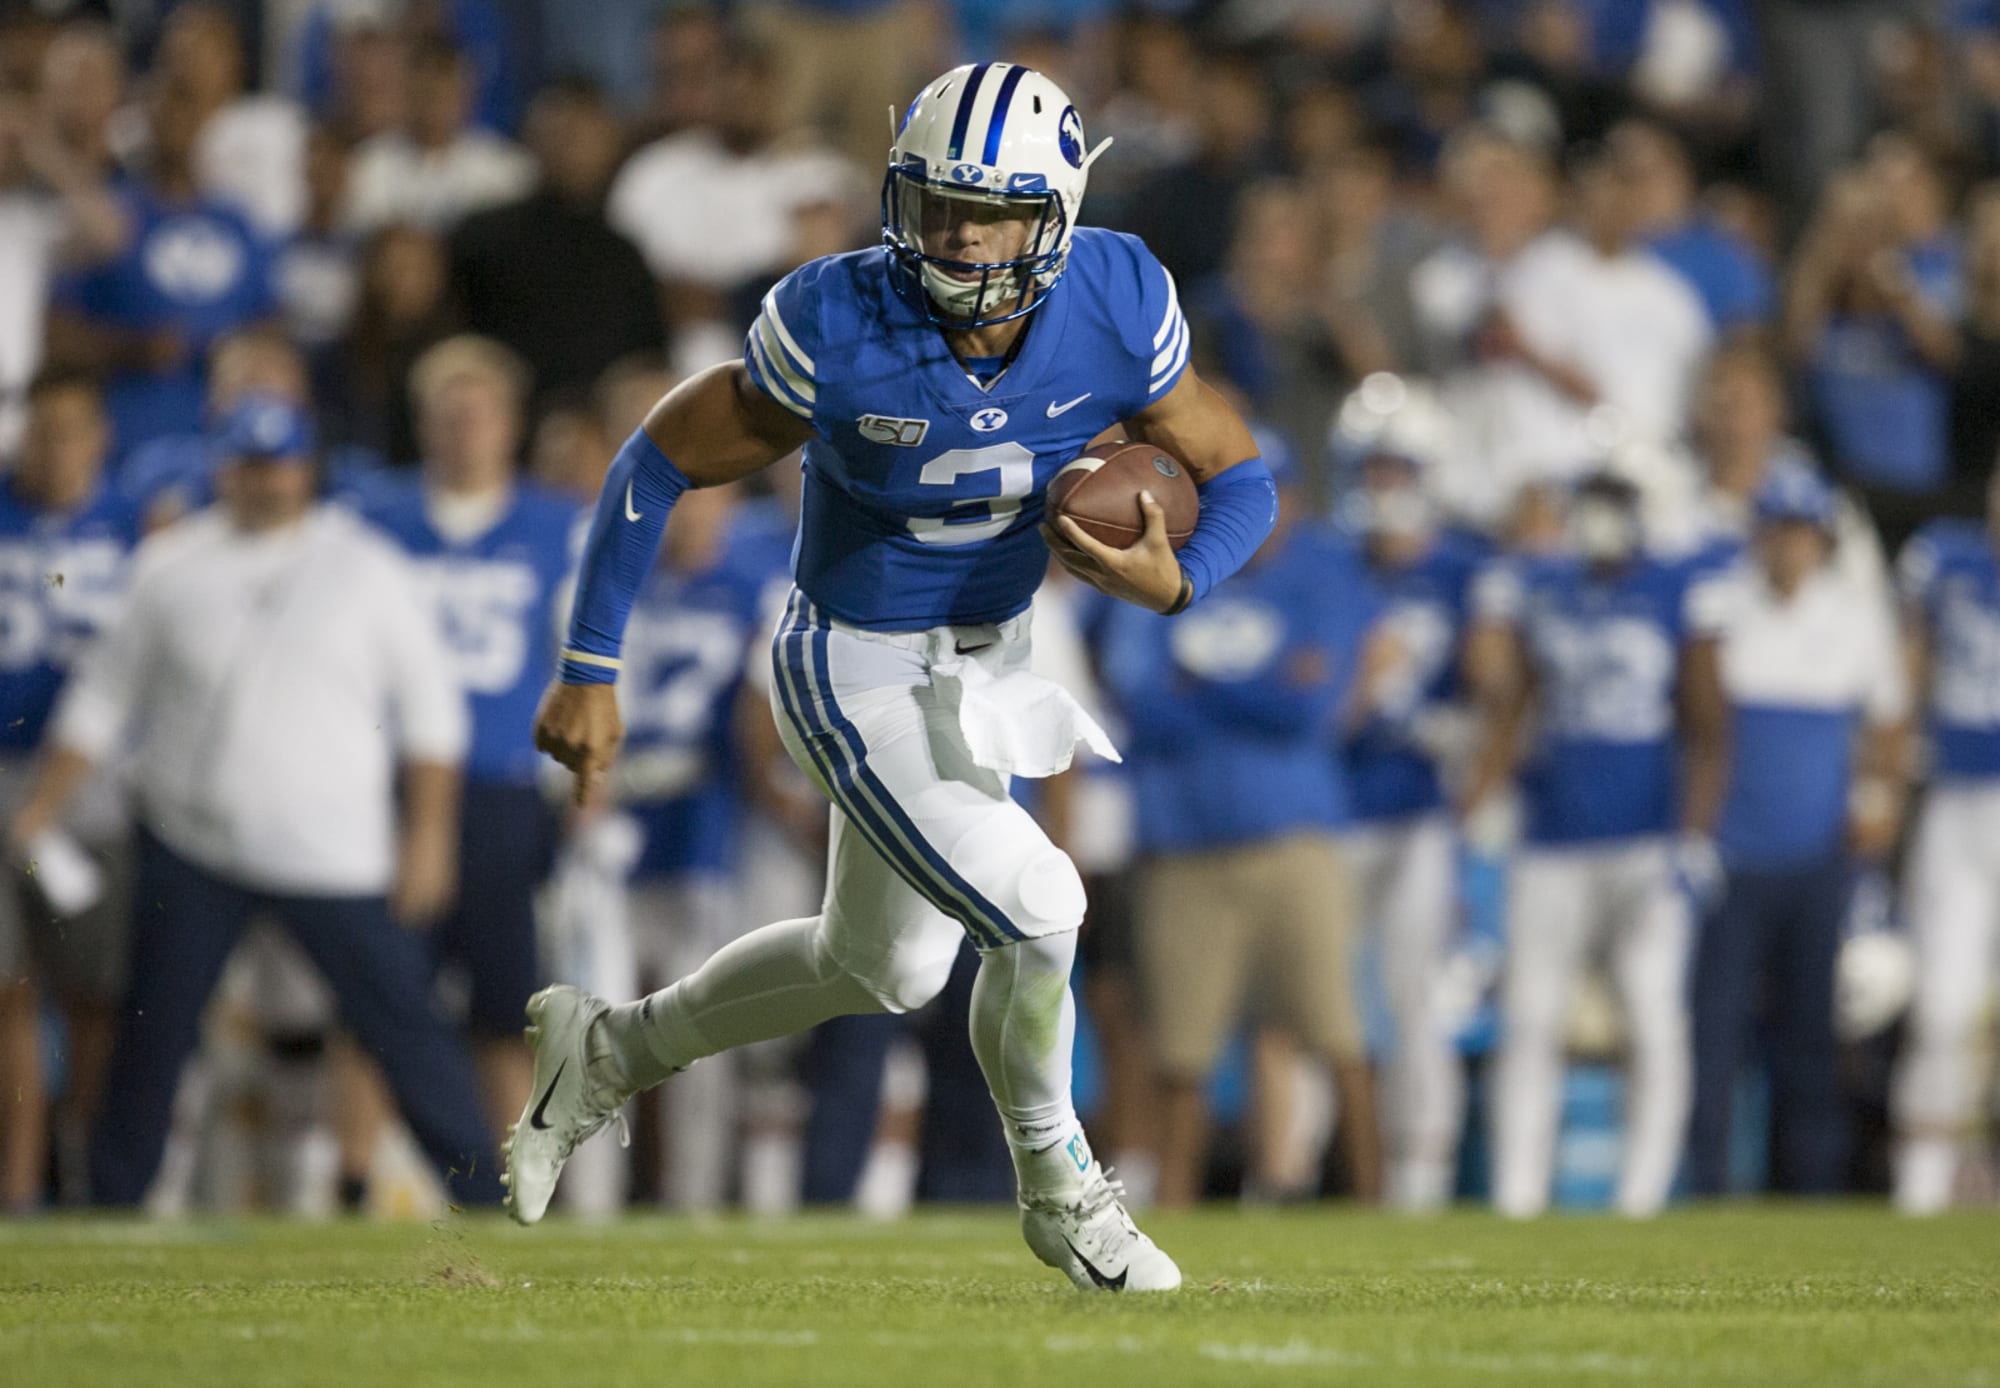 BYU Football officially announces the starting quarterback